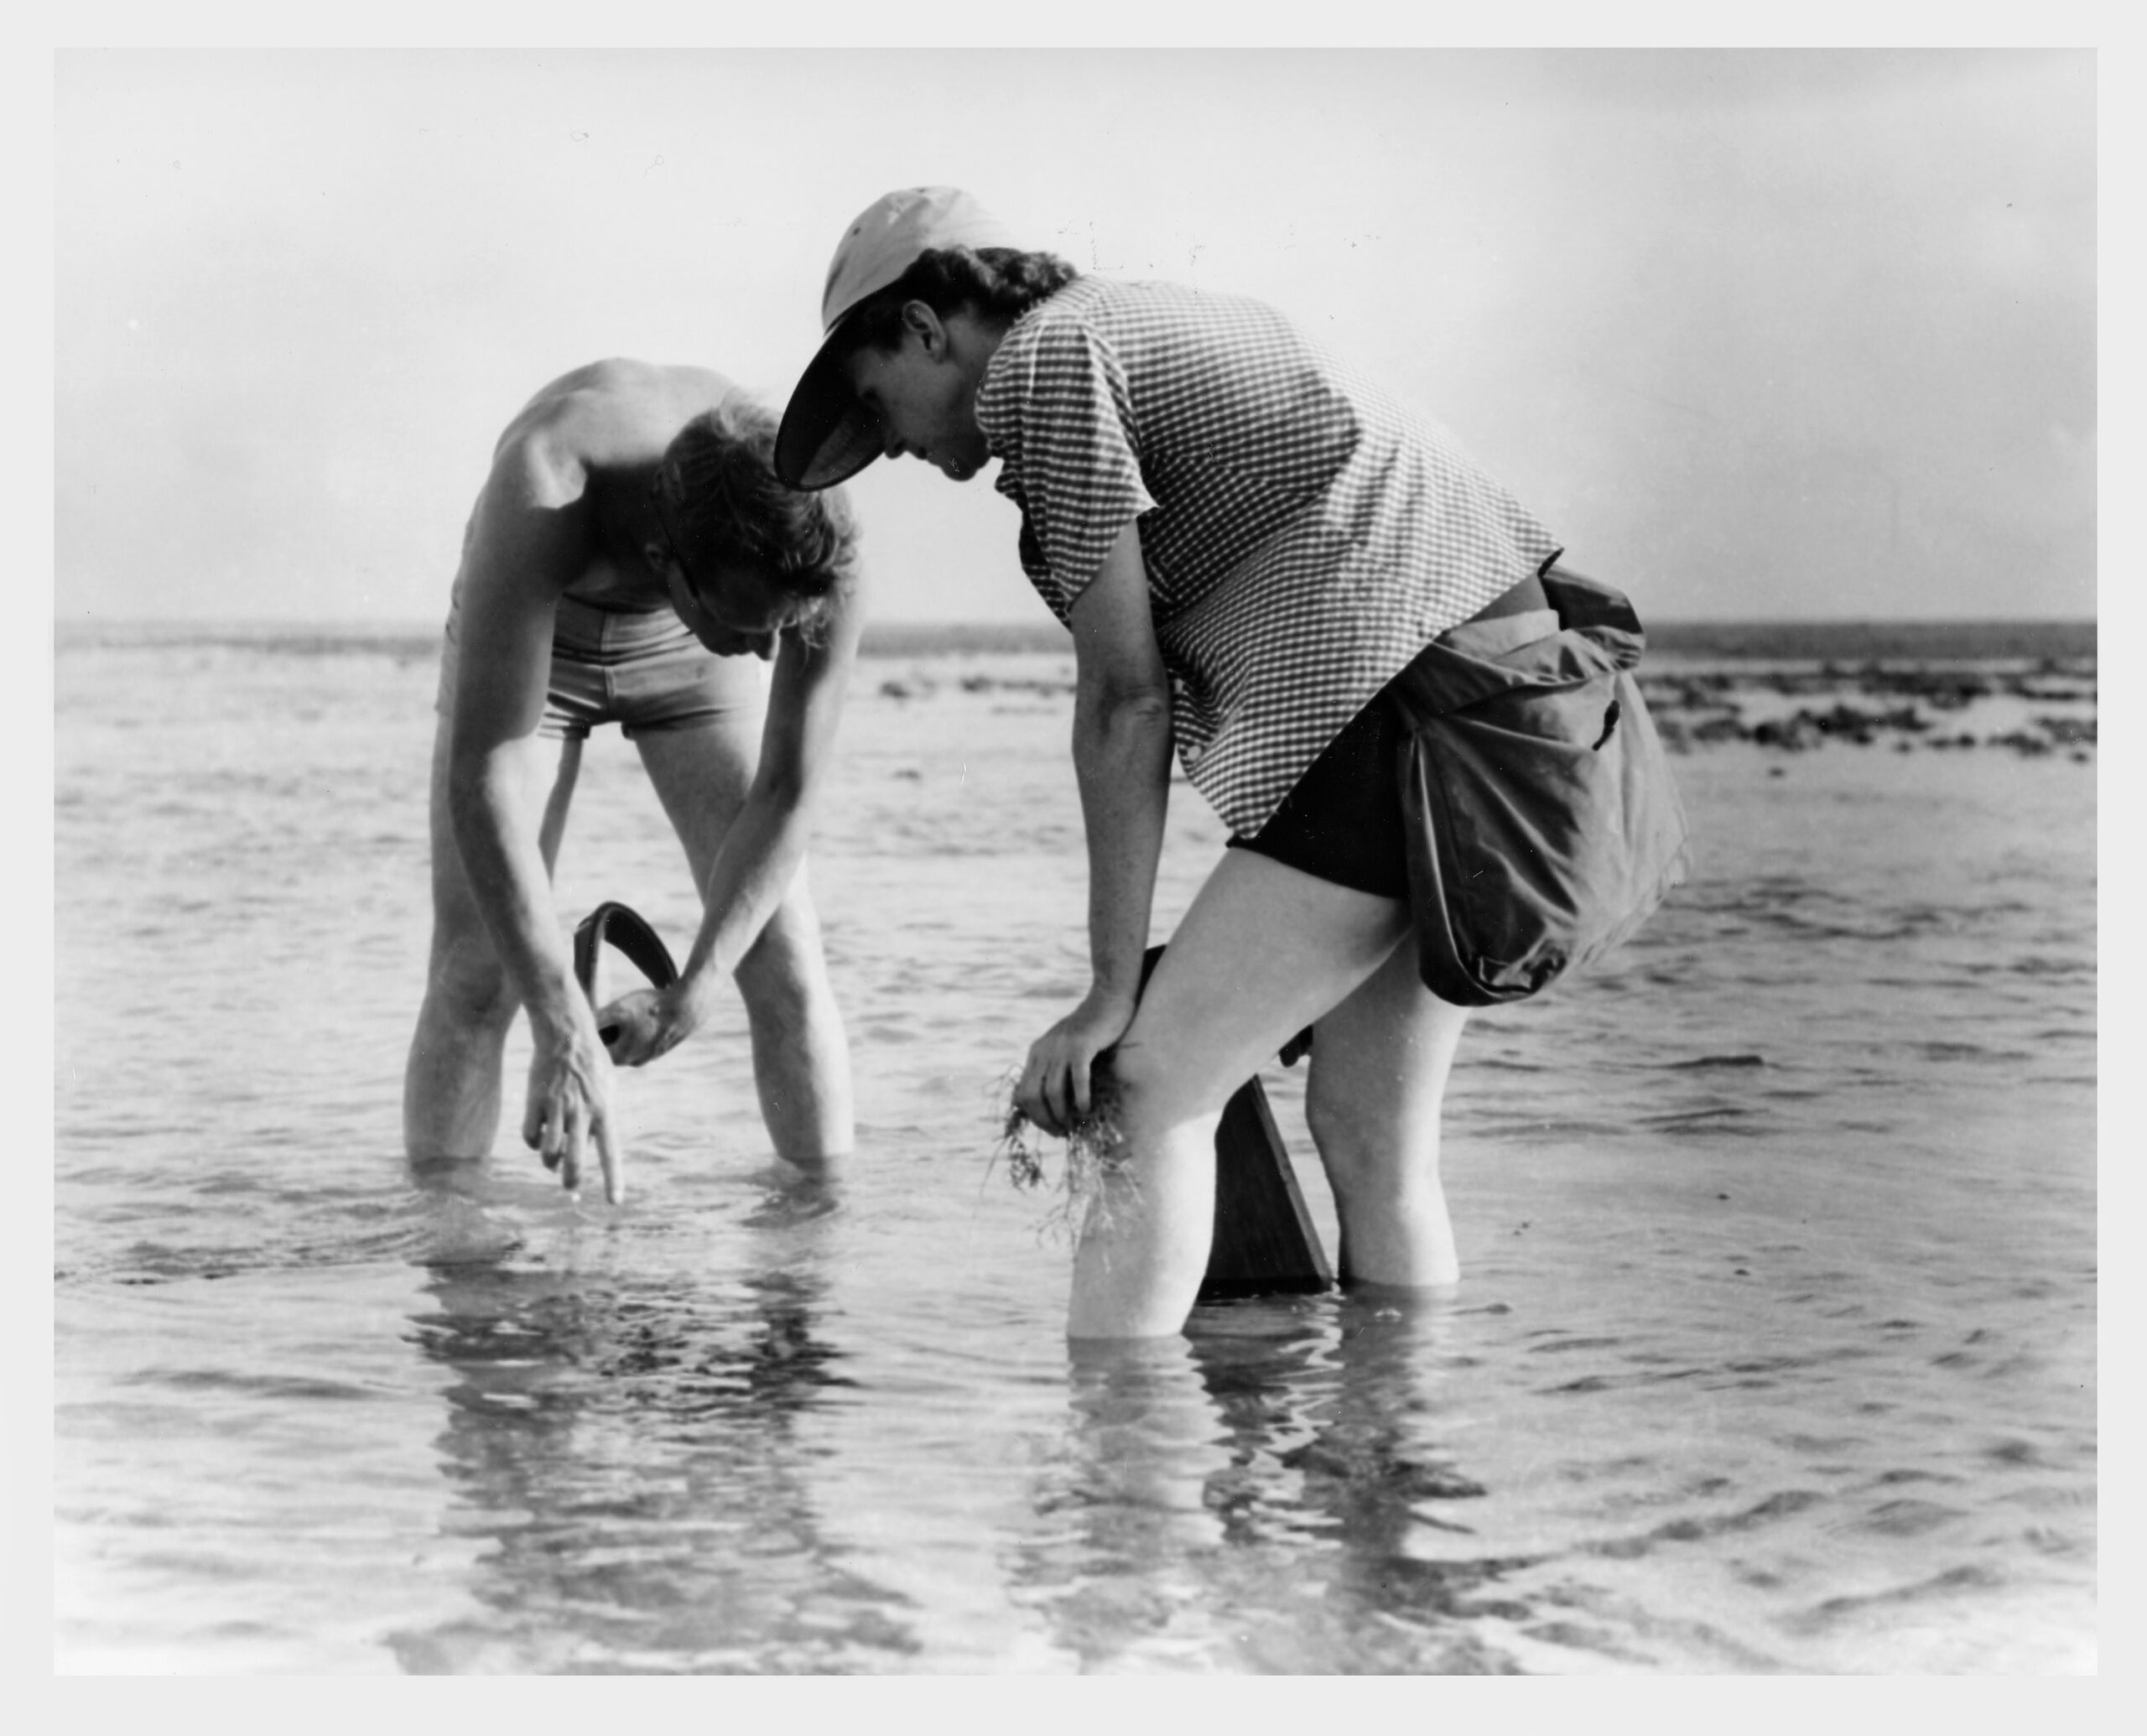 Rachel Carson and Bob Hines conduct marine biology research, 1952 - National Archives Identifier: 166694458